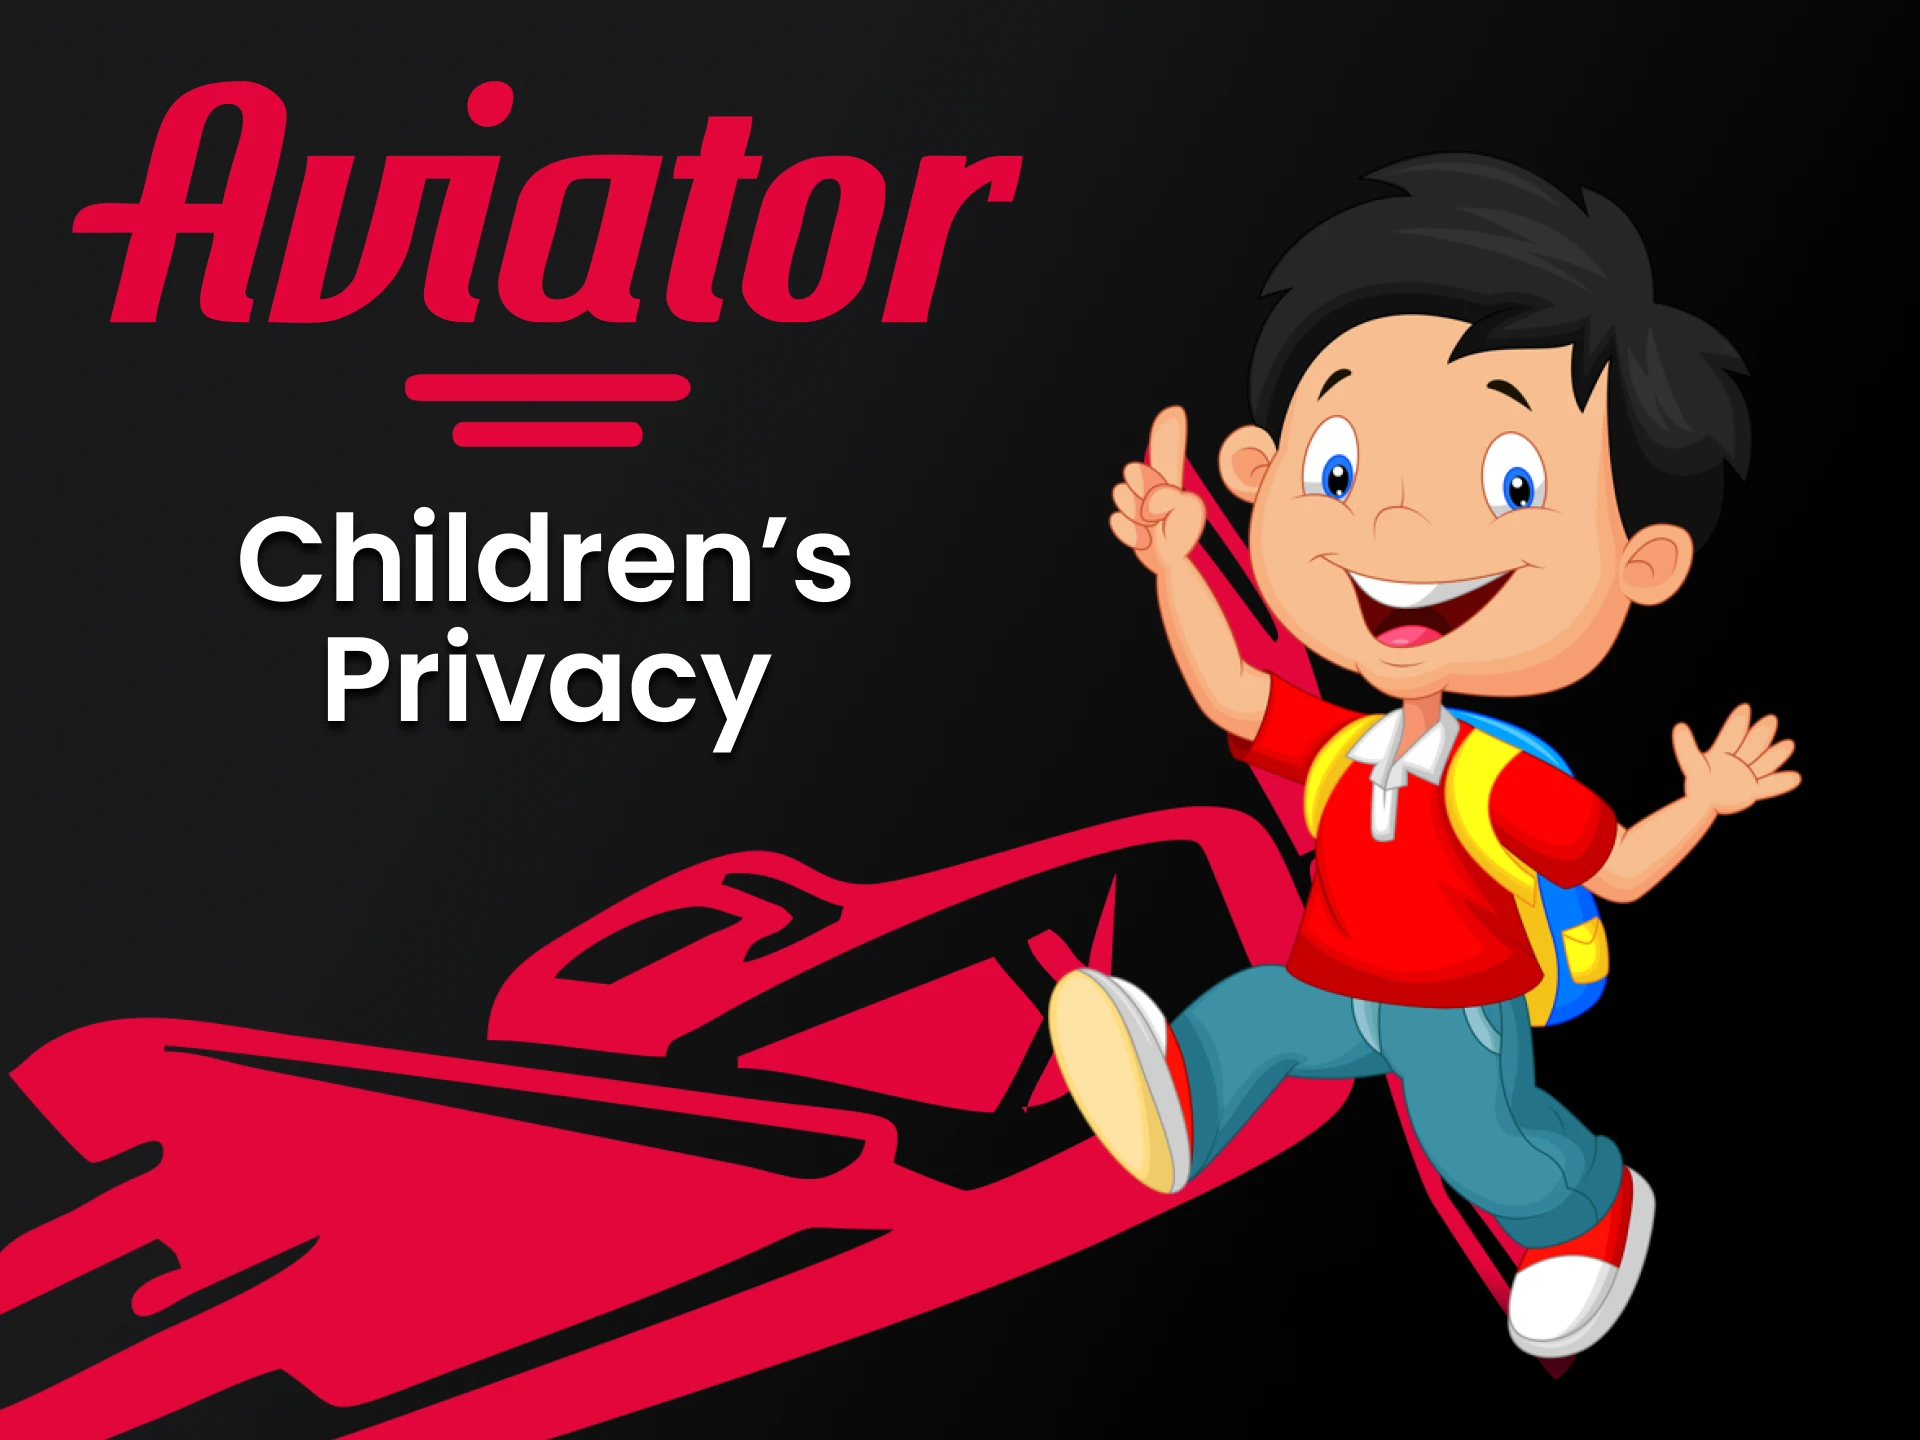 We will tell you about the privacy policy for minors.